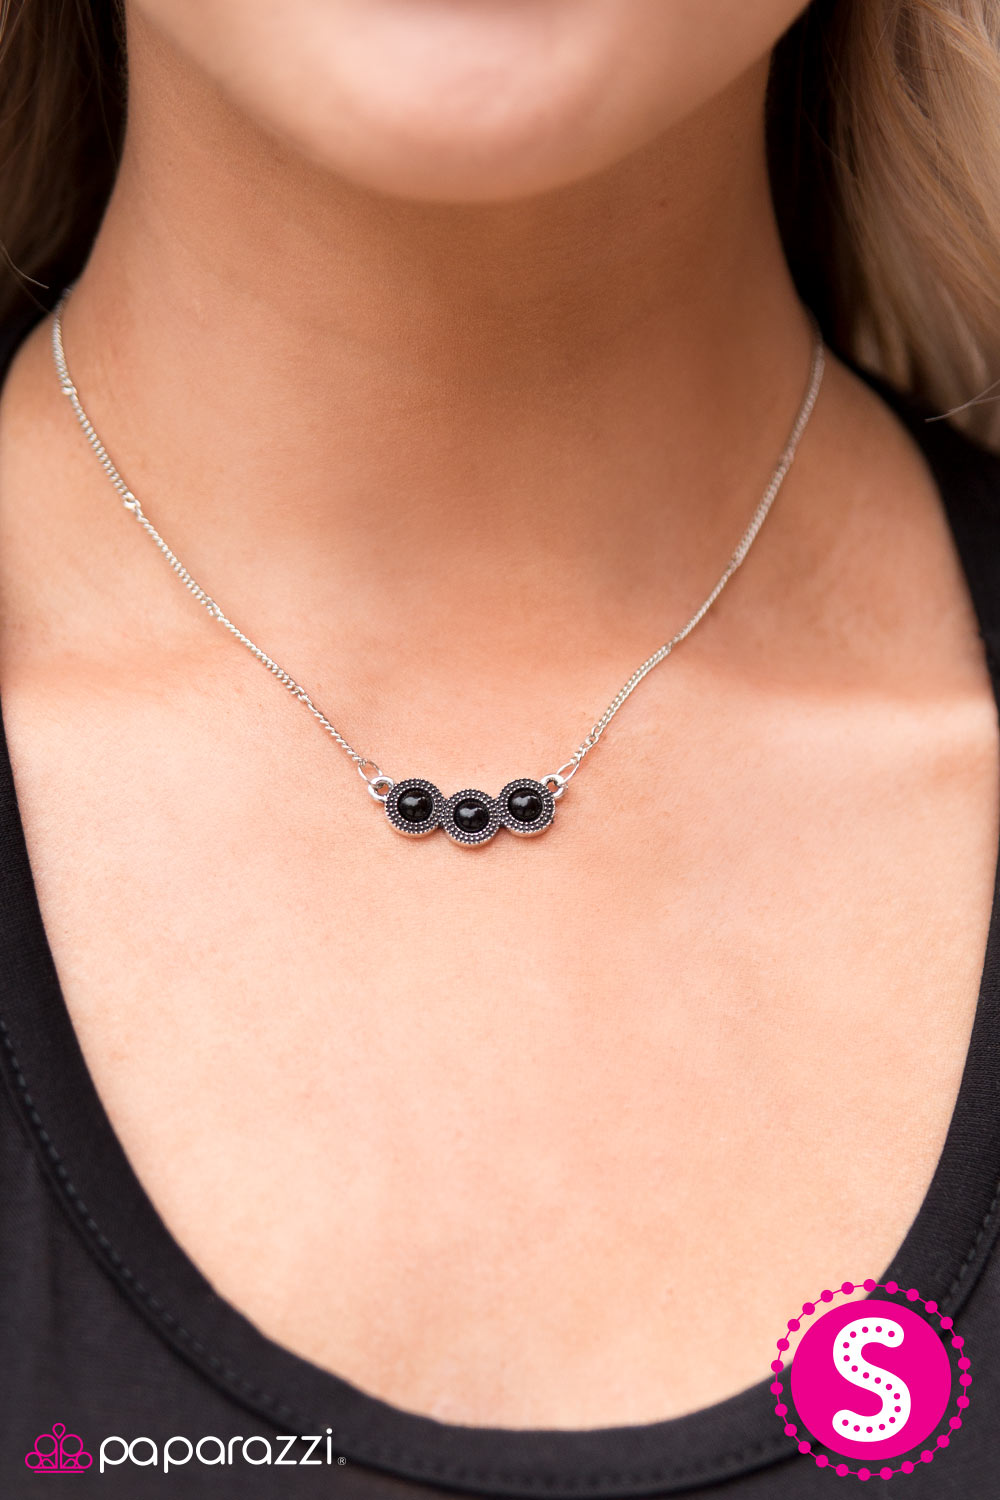 Country Classic - Black - Paparazzi necklace